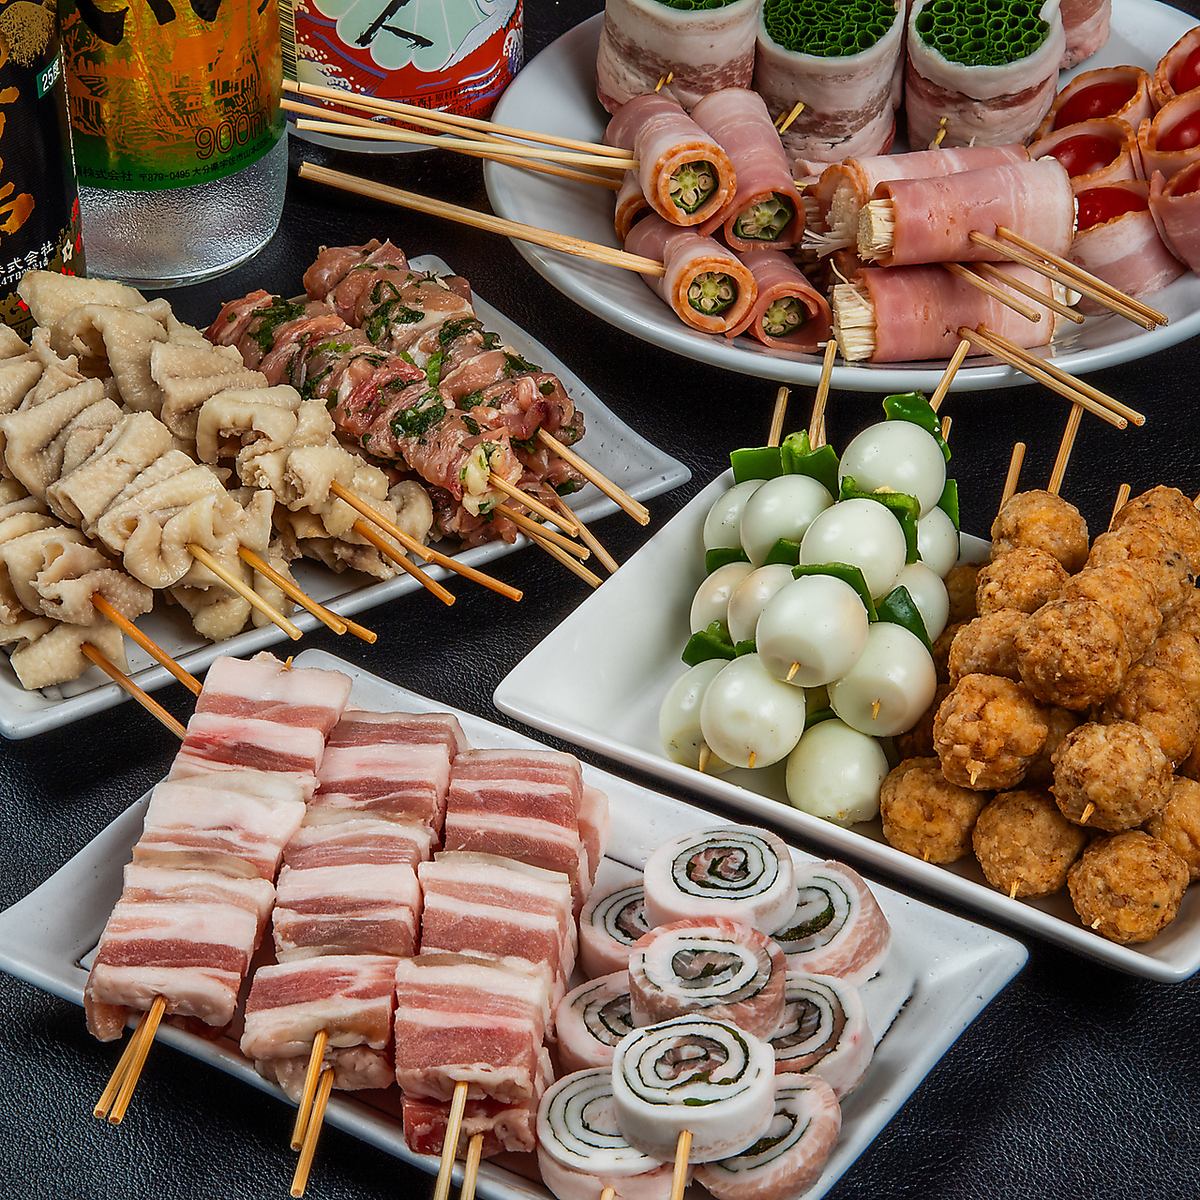 We have a wide variety of skewers and yakitori available!